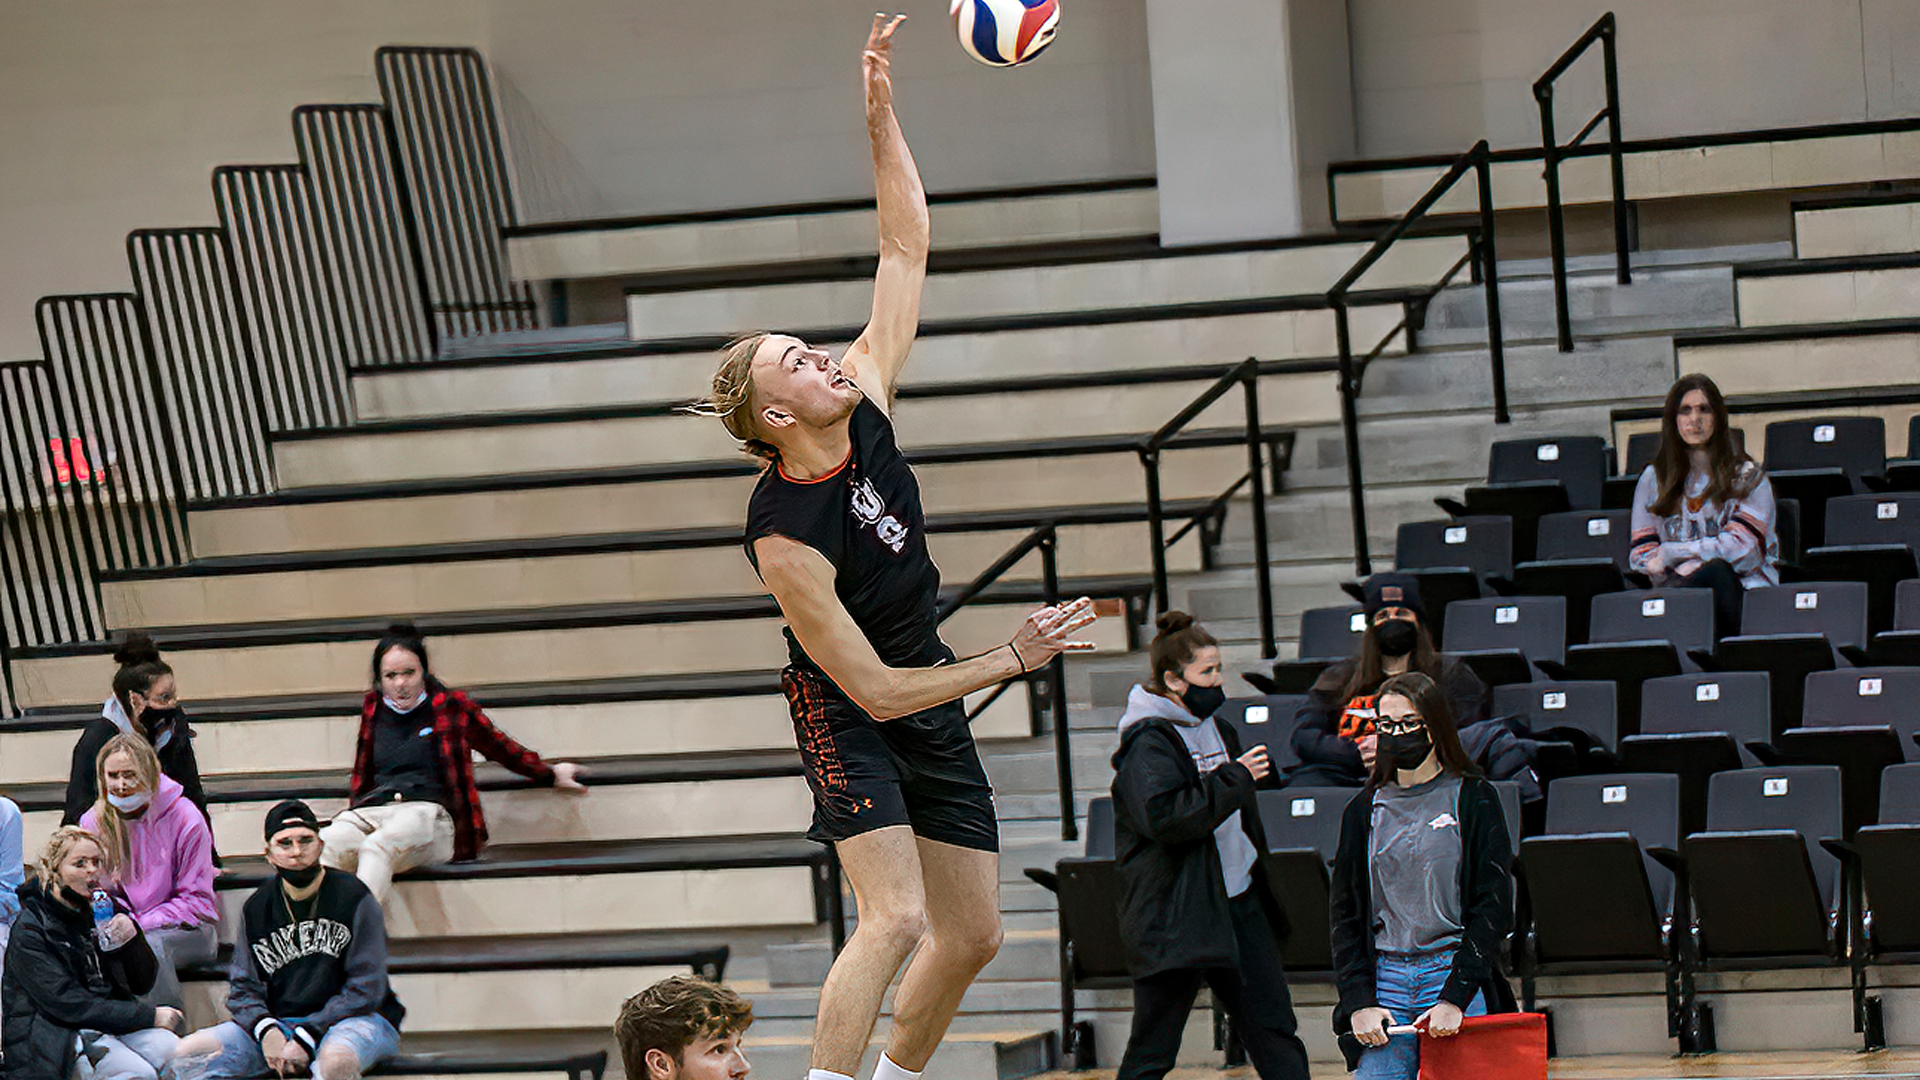 Off hitting night spoils NGU rematch for Pioneers